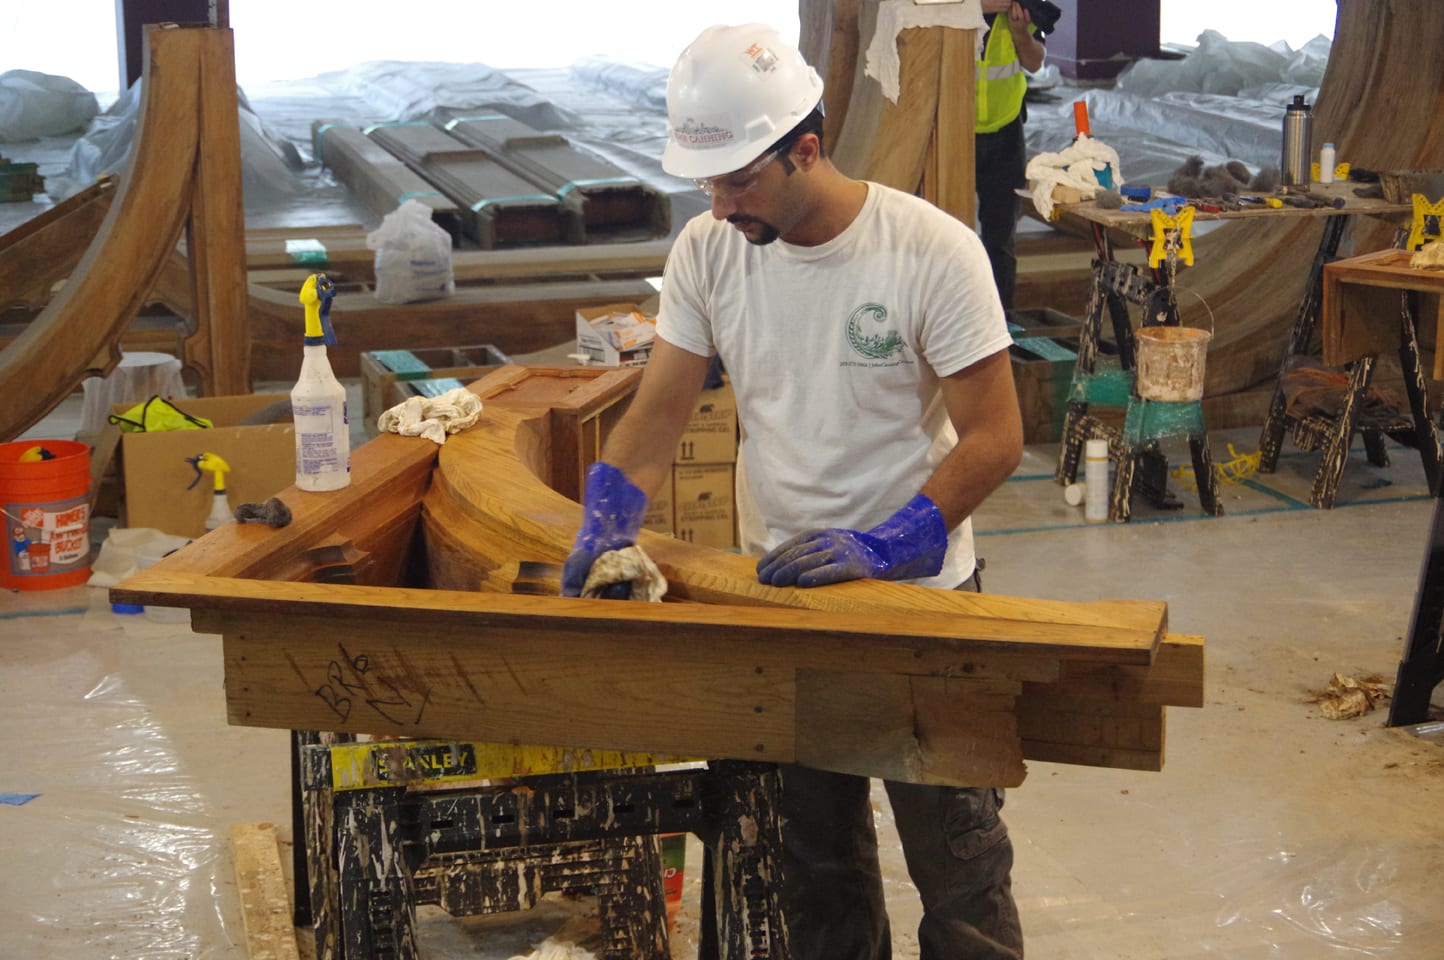 A dark-haired man in a white t-shirt and hardhat uses a cloth to wipe a heavy piece of wood sitting on sawhorses. 